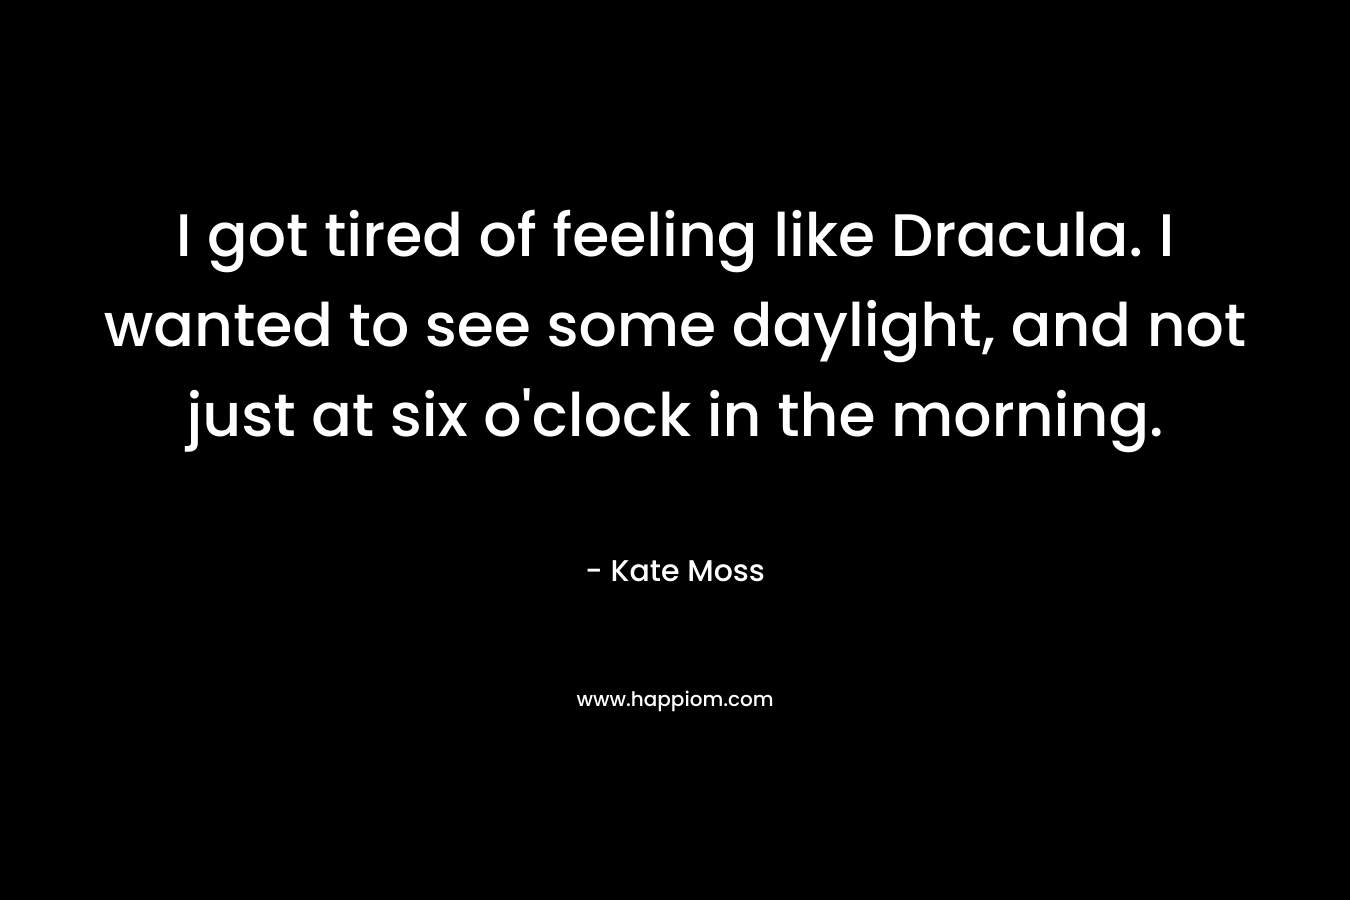 I got tired of feeling like Dracula. I wanted to see some daylight, and not just at six o’clock in the morning. – Kate Moss